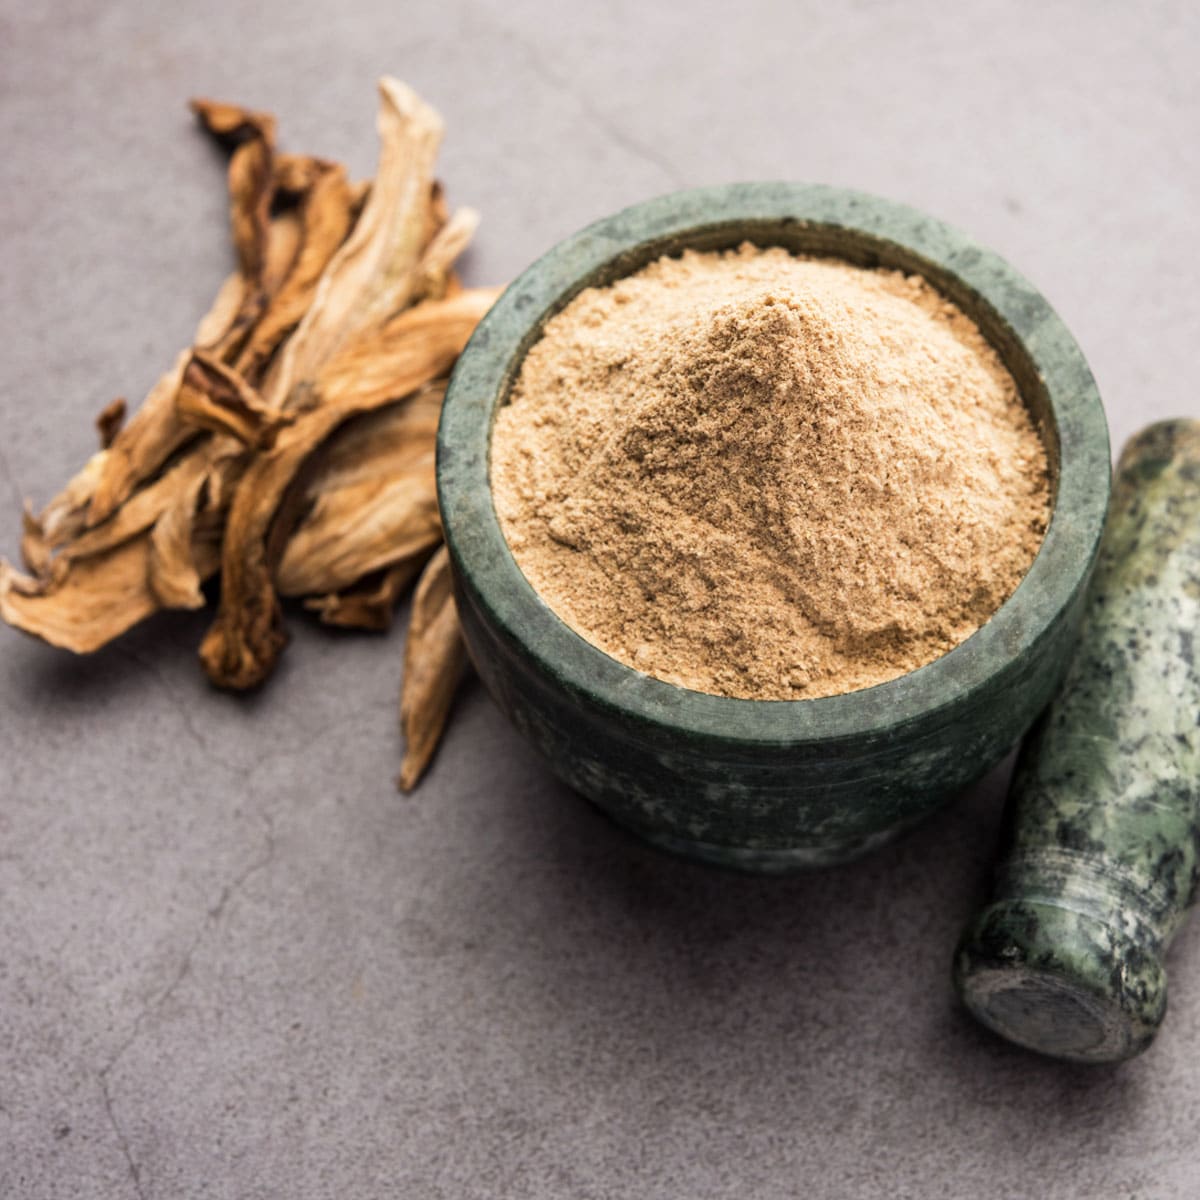 Mango powder is a dried and powdered form of the fruit, mango. It has a sweet and tangy flavor that is perfect for adding to smoothies, yogurt, or baking recipes.